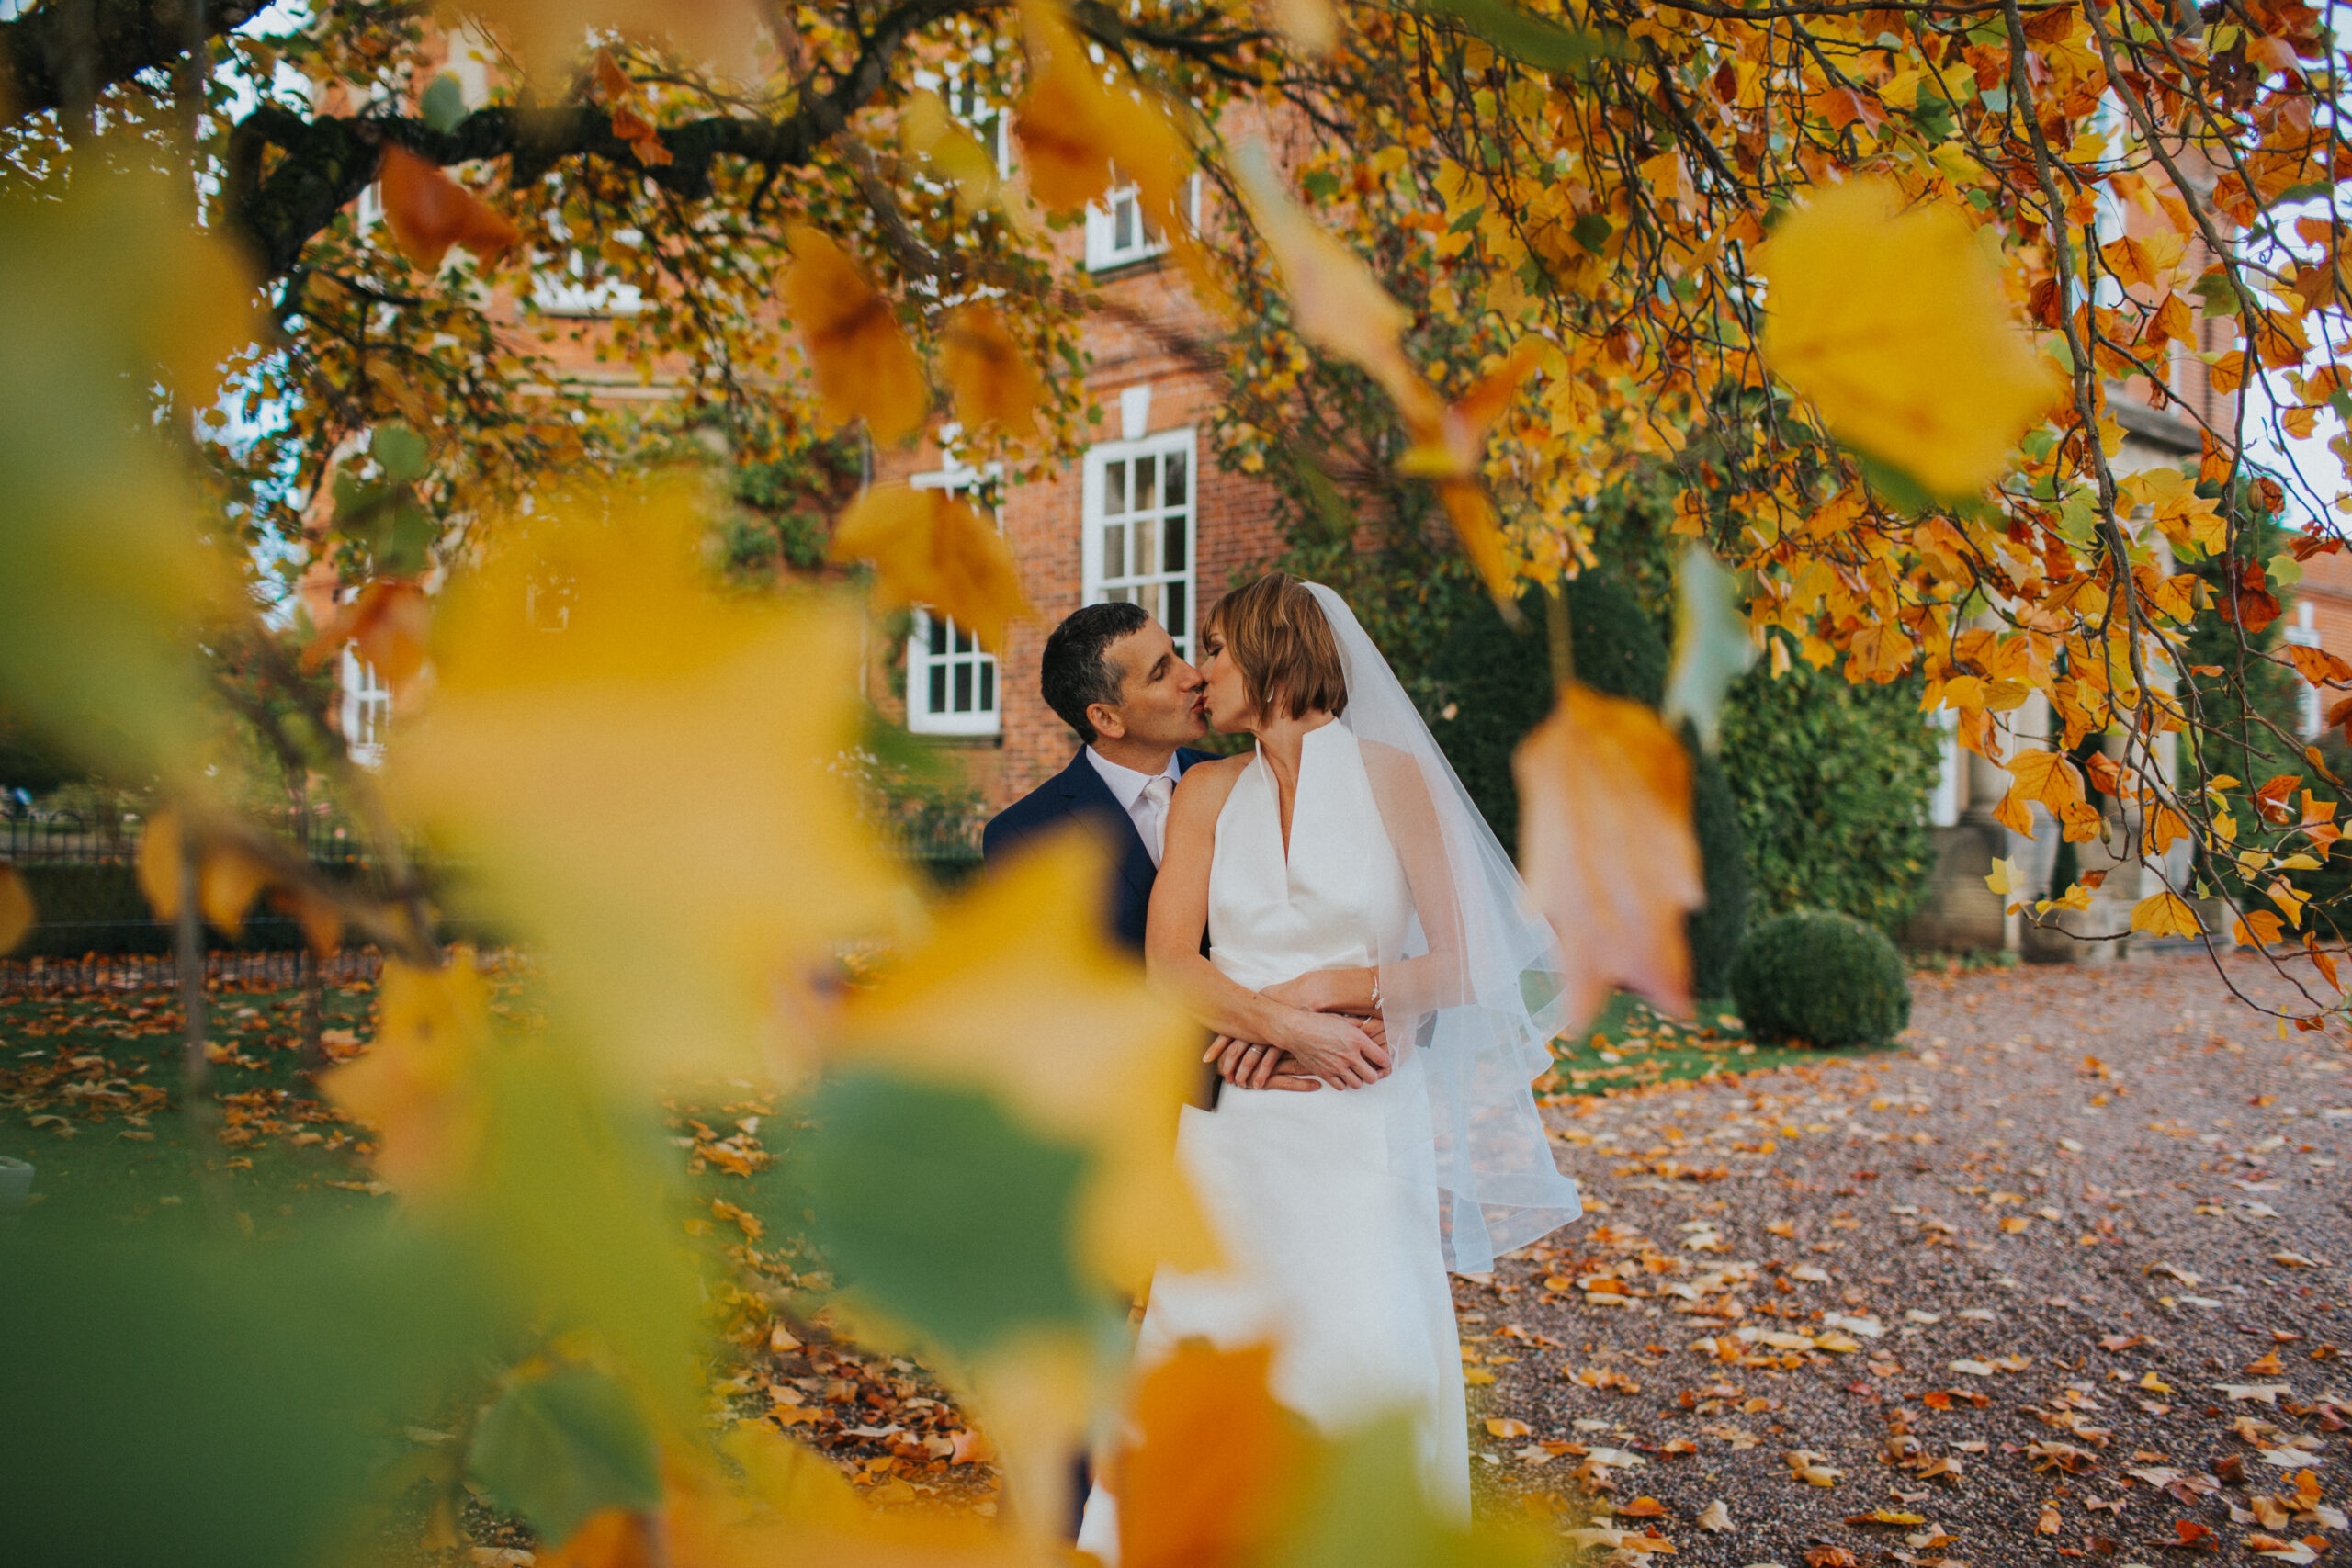 Rustic elegance and autumnal charm collide at Iscoyd Park